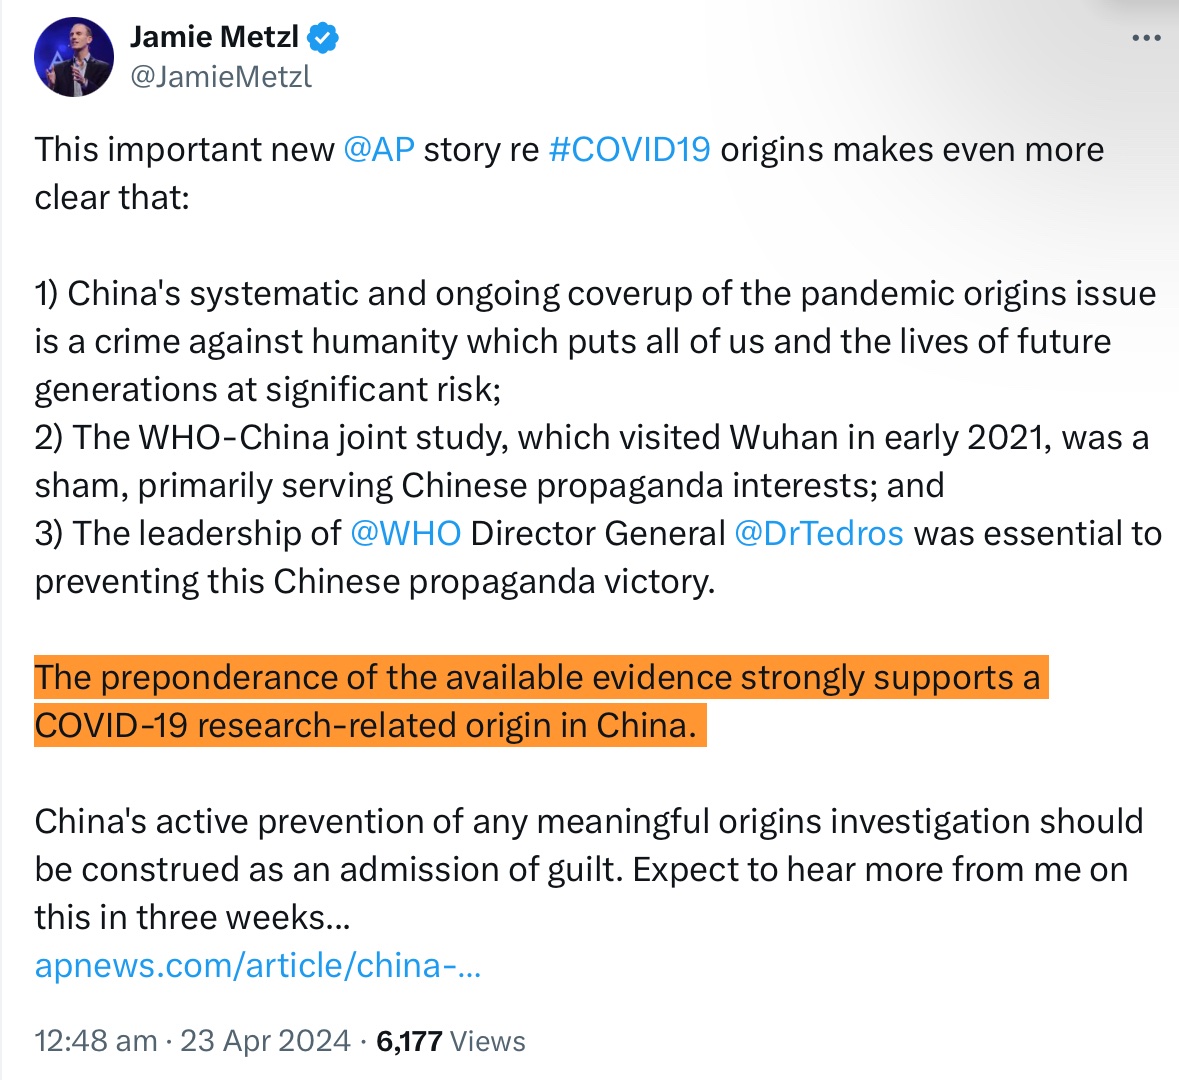 Jamie Metzl is a high-functioning idiot, episode #1001:

On what planet is it wise to TRUST CHINESE SOURCES, considering the possibility that China faked the lab leak, and faked the Wuhan outbreak, all to conceal a deliberate bio attack?

@JamieMetzl #OriginOfCovid #biowar